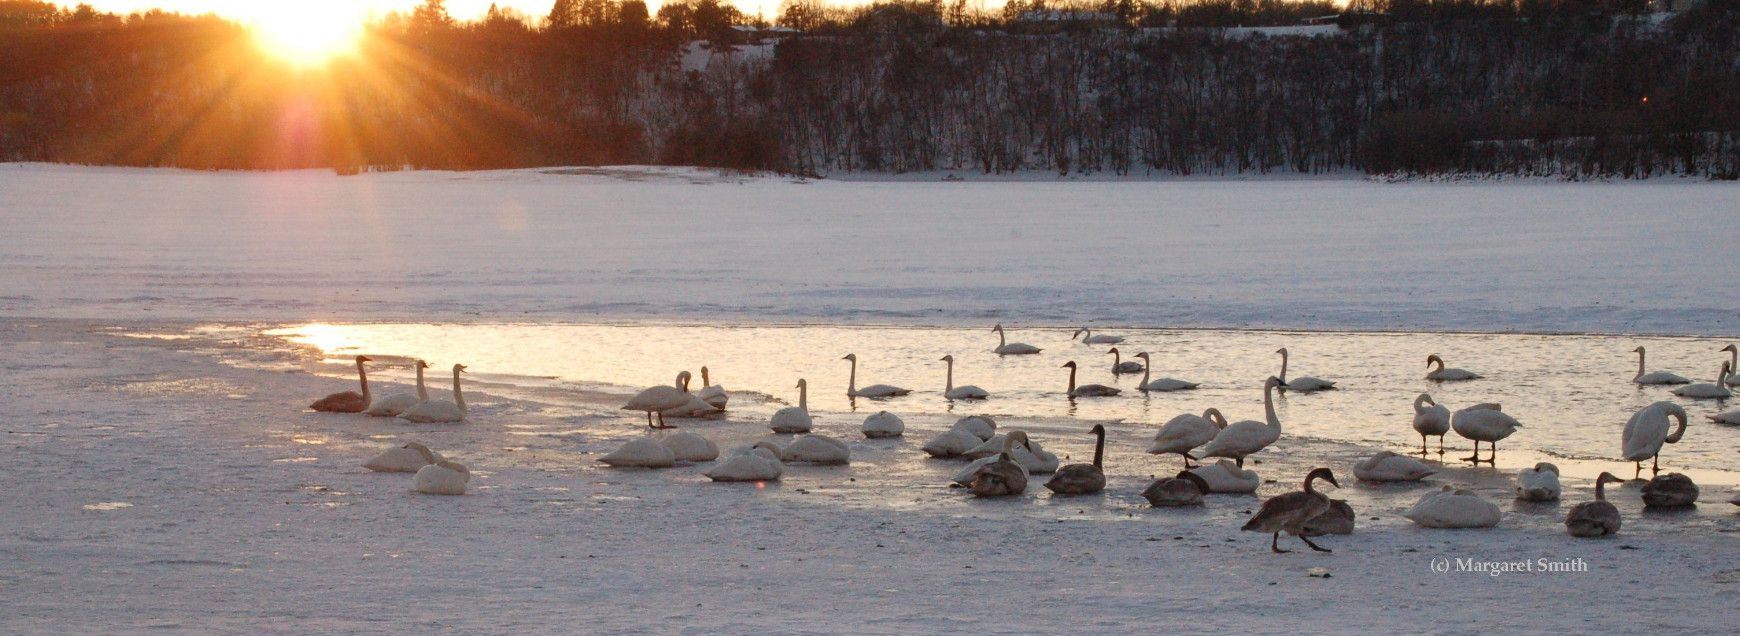 The Trumpeter Swan Society's New and Notes will keep you up to date on swan events, issues, and progress